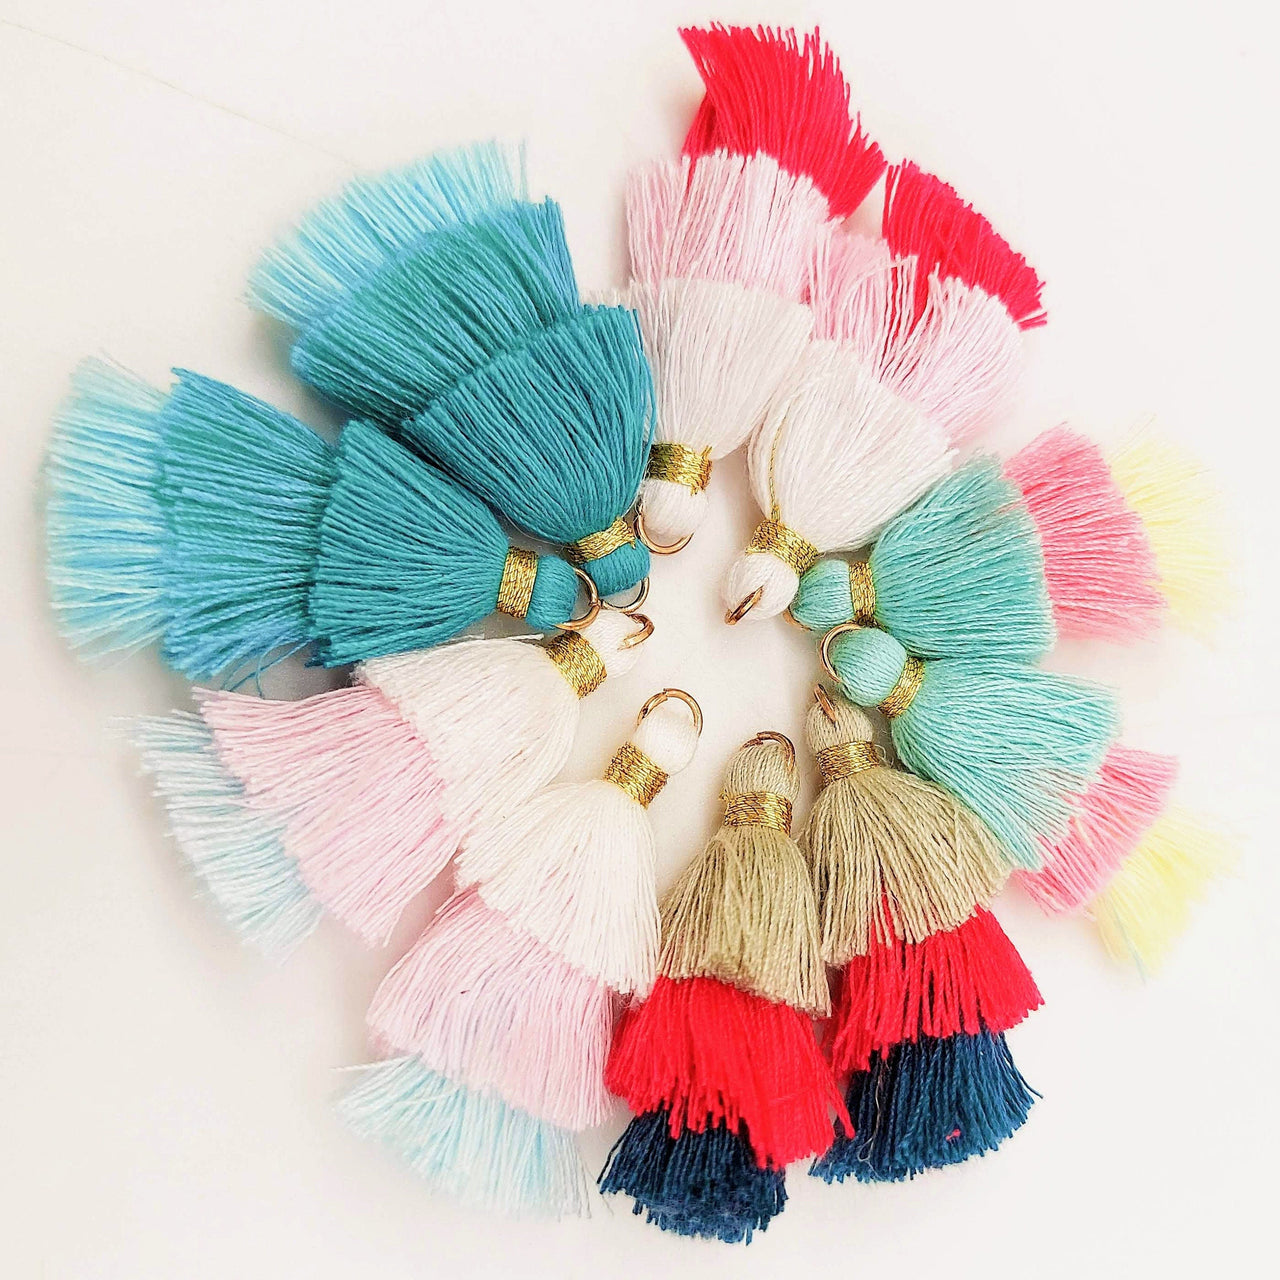 Grey,Pink and Blue Small Cotton Tassels in Three Layers With Gold Colour Brass Loop Ring, Tassel Charms x 5